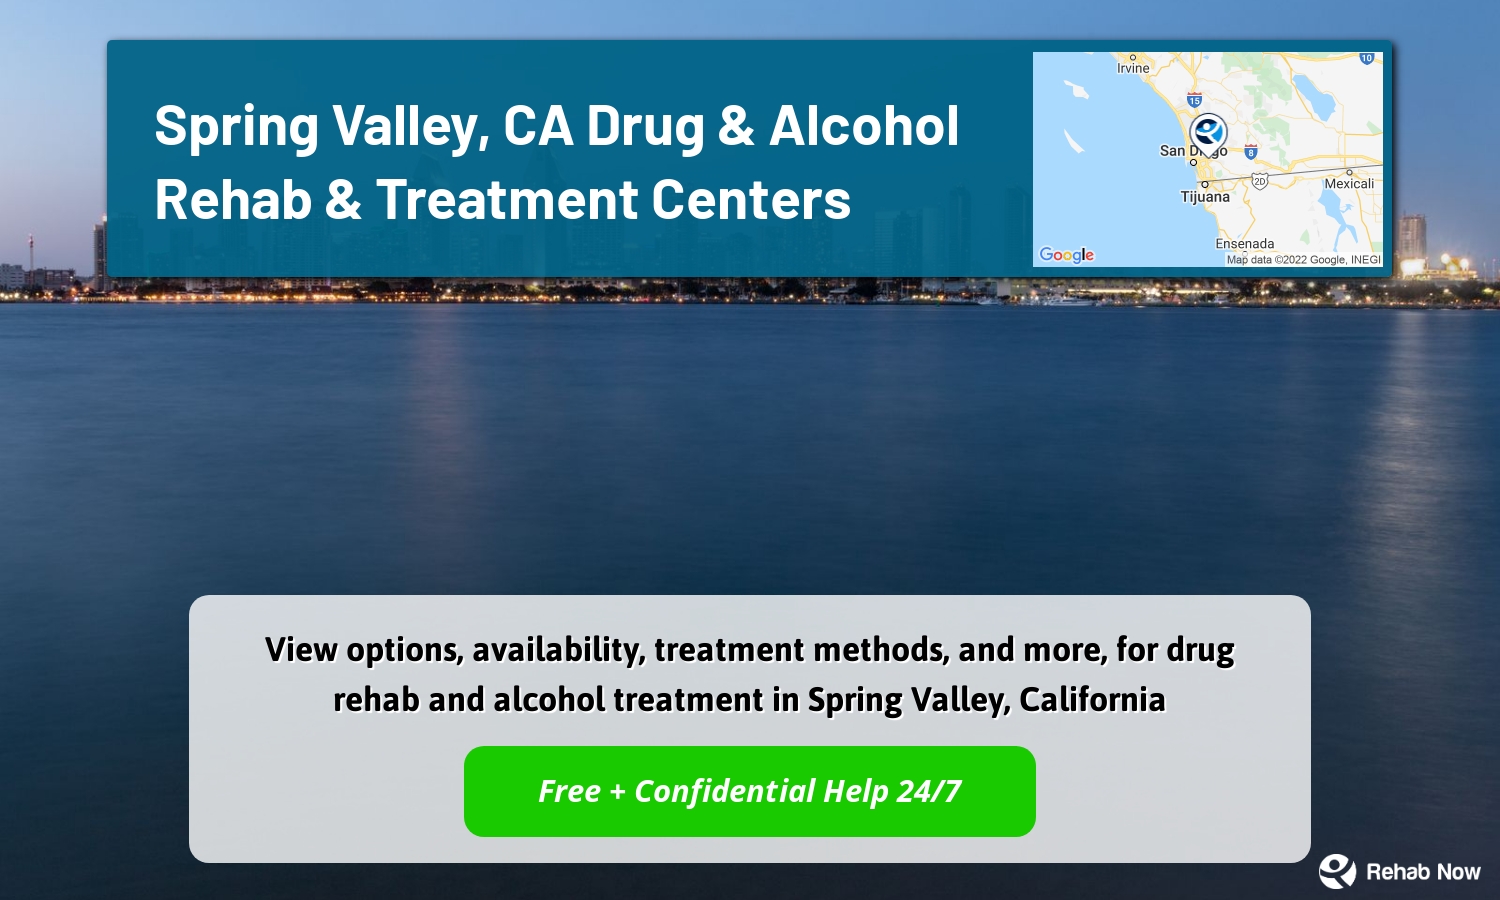 View options, availability, treatment methods, and more, for drug rehab and alcohol treatment in Spring Valley, California